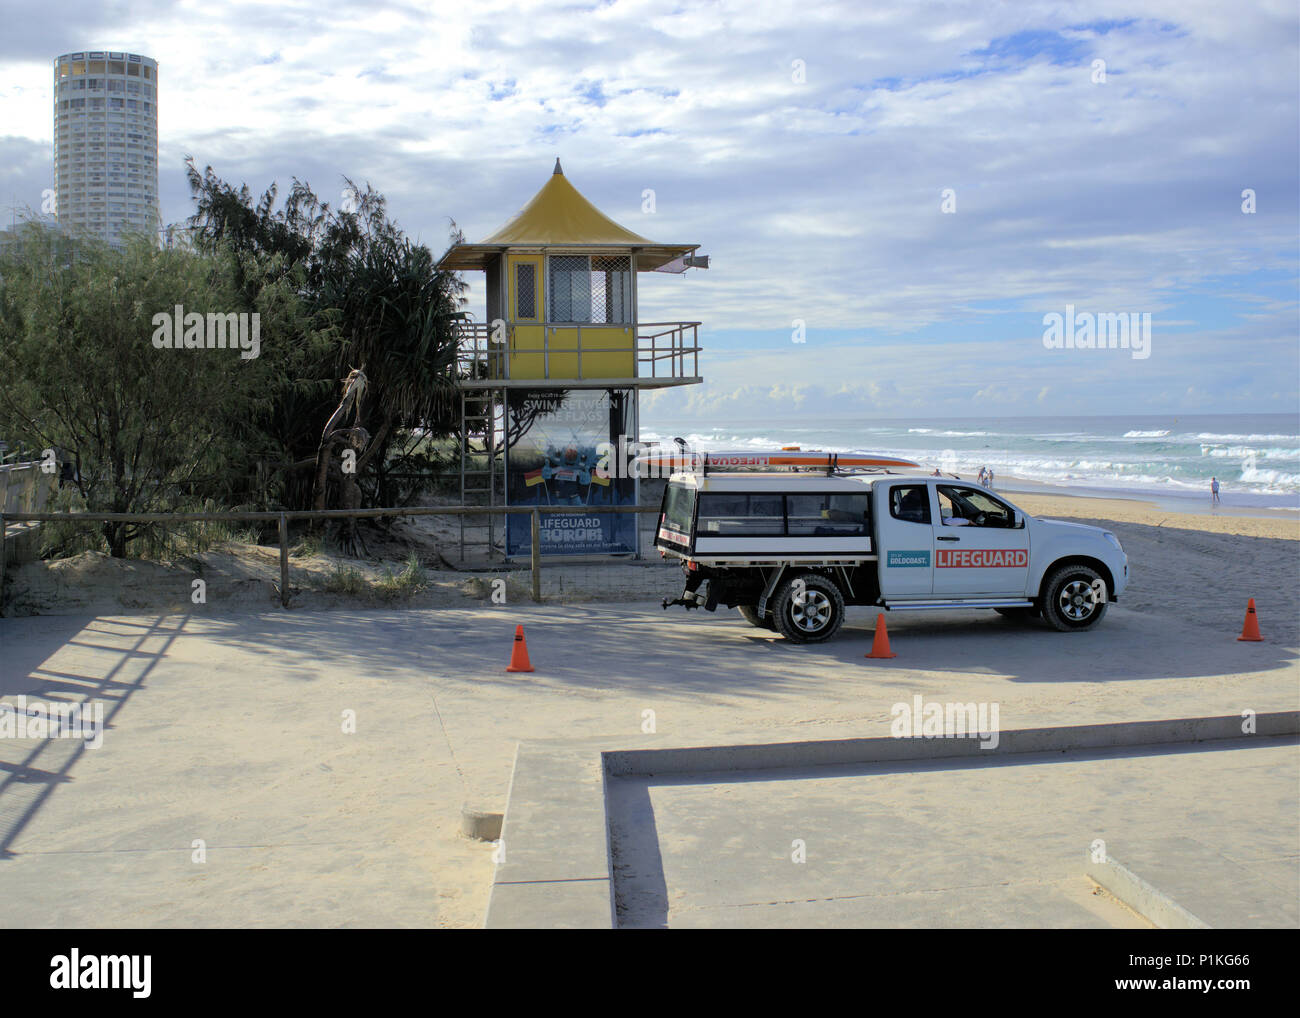 Rescue vehicle ready at beach. Life guards observation tower cabin and rescue vehicle at Surfer Paradise beach in Gold Coast Australia, 9 June 2018 Stock Photo